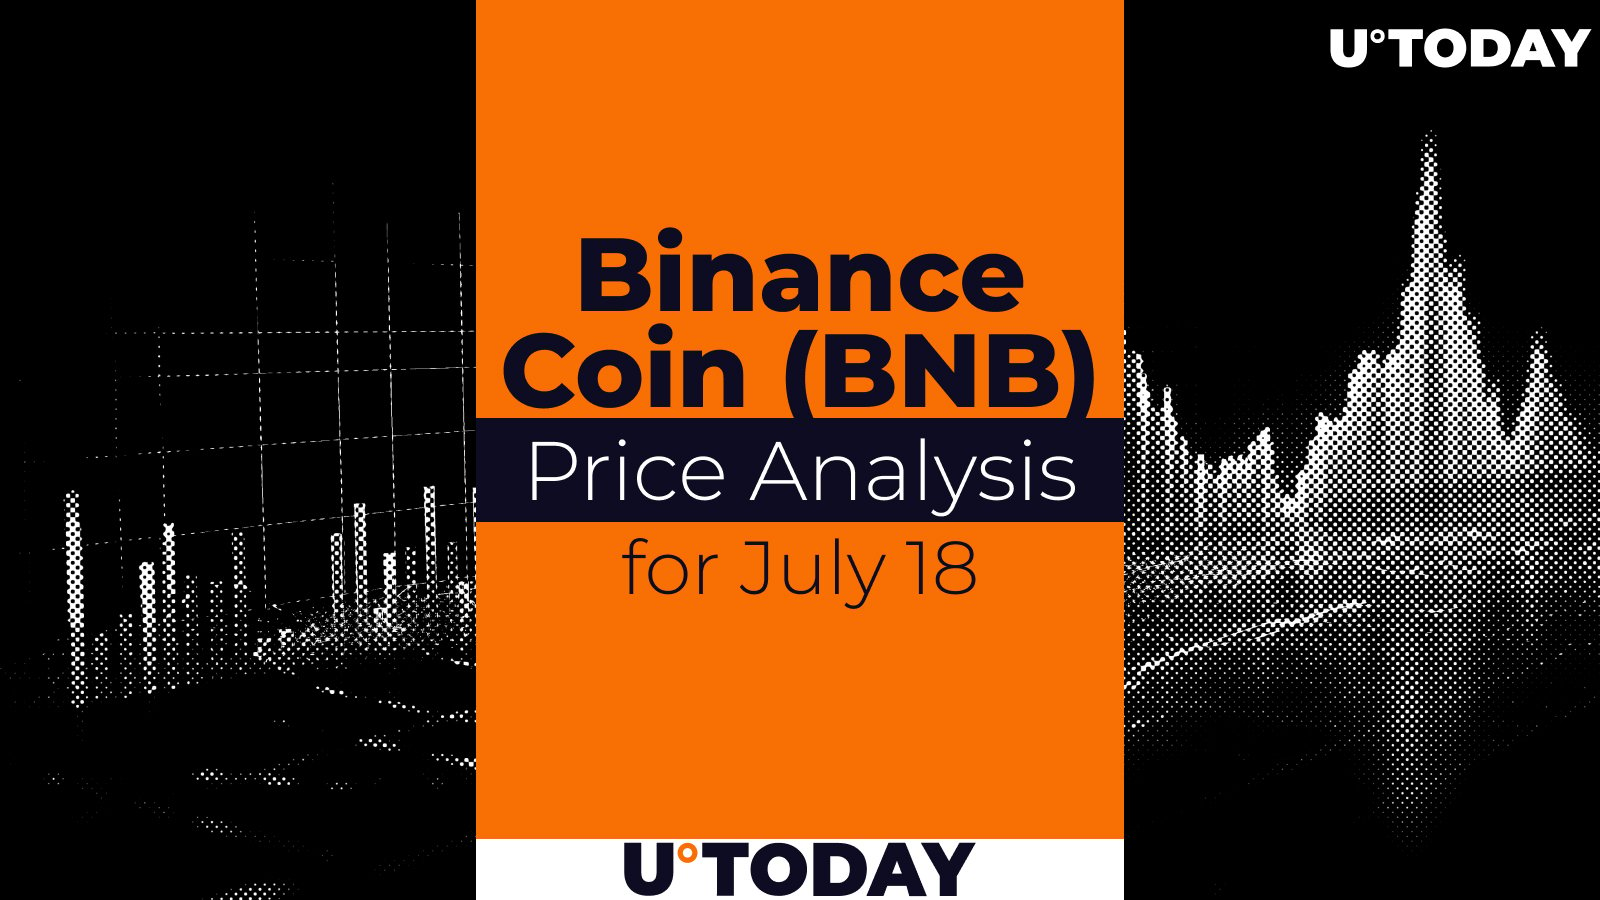 Binance Coin (BNB) Price Prediction for July 18